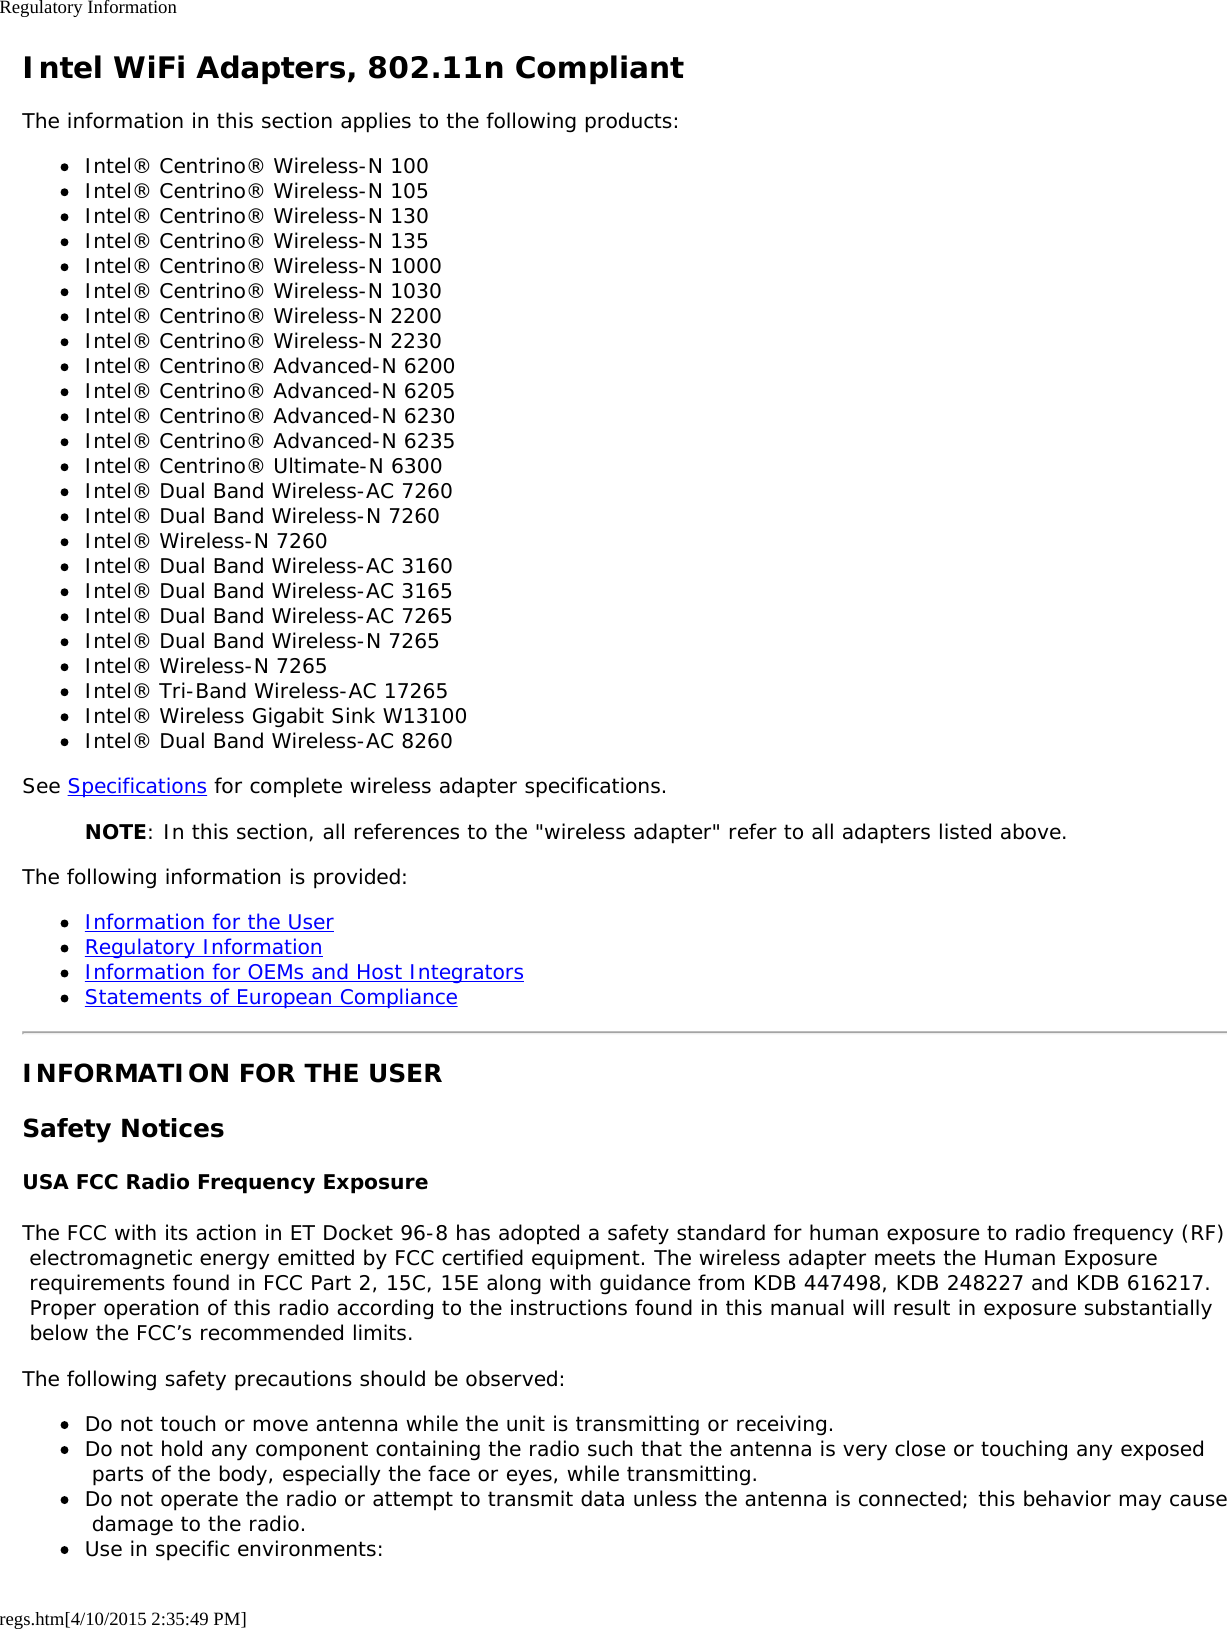 Regulatory Informationregs.htm[4/10/2015 2:35:49 PM]Intel WiFi Adapters, 802.11n CompliantThe information in this section applies to the following products:Intel® Centrino® Wireless-N 100Intel® Centrino® Wireless-N 105Intel® Centrino® Wireless-N 130Intel® Centrino® Wireless-N 135Intel® Centrino® Wireless-N 1000Intel® Centrino® Wireless-N 1030Intel® Centrino® Wireless-N 2200Intel® Centrino® Wireless-N 2230Intel® Centrino® Advanced-N 6200Intel® Centrino® Advanced-N 6205Intel® Centrino® Advanced-N 6230Intel® Centrino® Advanced-N 6235Intel® Centrino® Ultimate-N 6300Intel® Dual Band Wireless-AC 7260Intel® Dual Band Wireless-N 7260Intel® Wireless-N 7260Intel® Dual Band Wireless-AC 3160Intel® Dual Band Wireless-AC 3165Intel® Dual Band Wireless-AC 7265Intel® Dual Band Wireless-N 7265Intel® Wireless-N 7265Intel® Tri-Band Wireless-AC 17265Intel® Wireless Gigabit Sink W13100Intel® Dual Band Wireless-AC 8260See Specifications for complete wireless adapter specifications.NOTE: In this section, all references to the &quot;wireless adapter&quot; refer to all adapters listed above.The following information is provided:Information for the UserRegulatory InformationInformation for OEMs and Host IntegratorsStatements of European ComplianceINFORMATION FOR THE USERSafety NoticesUSA FCC Radio Frequency ExposureThe FCC with its action in ET Docket 96-8 has adopted a safety standard for human exposure to radio frequency (RF) electromagnetic energy emitted by FCC certified equipment. The wireless adapter meets the Human Exposure requirements found in FCC Part 2, 15C, 15E along with guidance from KDB 447498, KDB 248227 and KDB 616217. Proper operation of this radio according to the instructions found in this manual will result in exposure substantially below the FCC’s recommended limits.The following safety precautions should be observed:Do not touch or move antenna while the unit is transmitting or receiving.Do not hold any component containing the radio such that the antenna is very close or touching any exposed parts of the body, especially the face or eyes, while transmitting.Do not operate the radio or attempt to transmit data unless the antenna is connected; this behavior may cause damage to the radio.Use in specific environments: